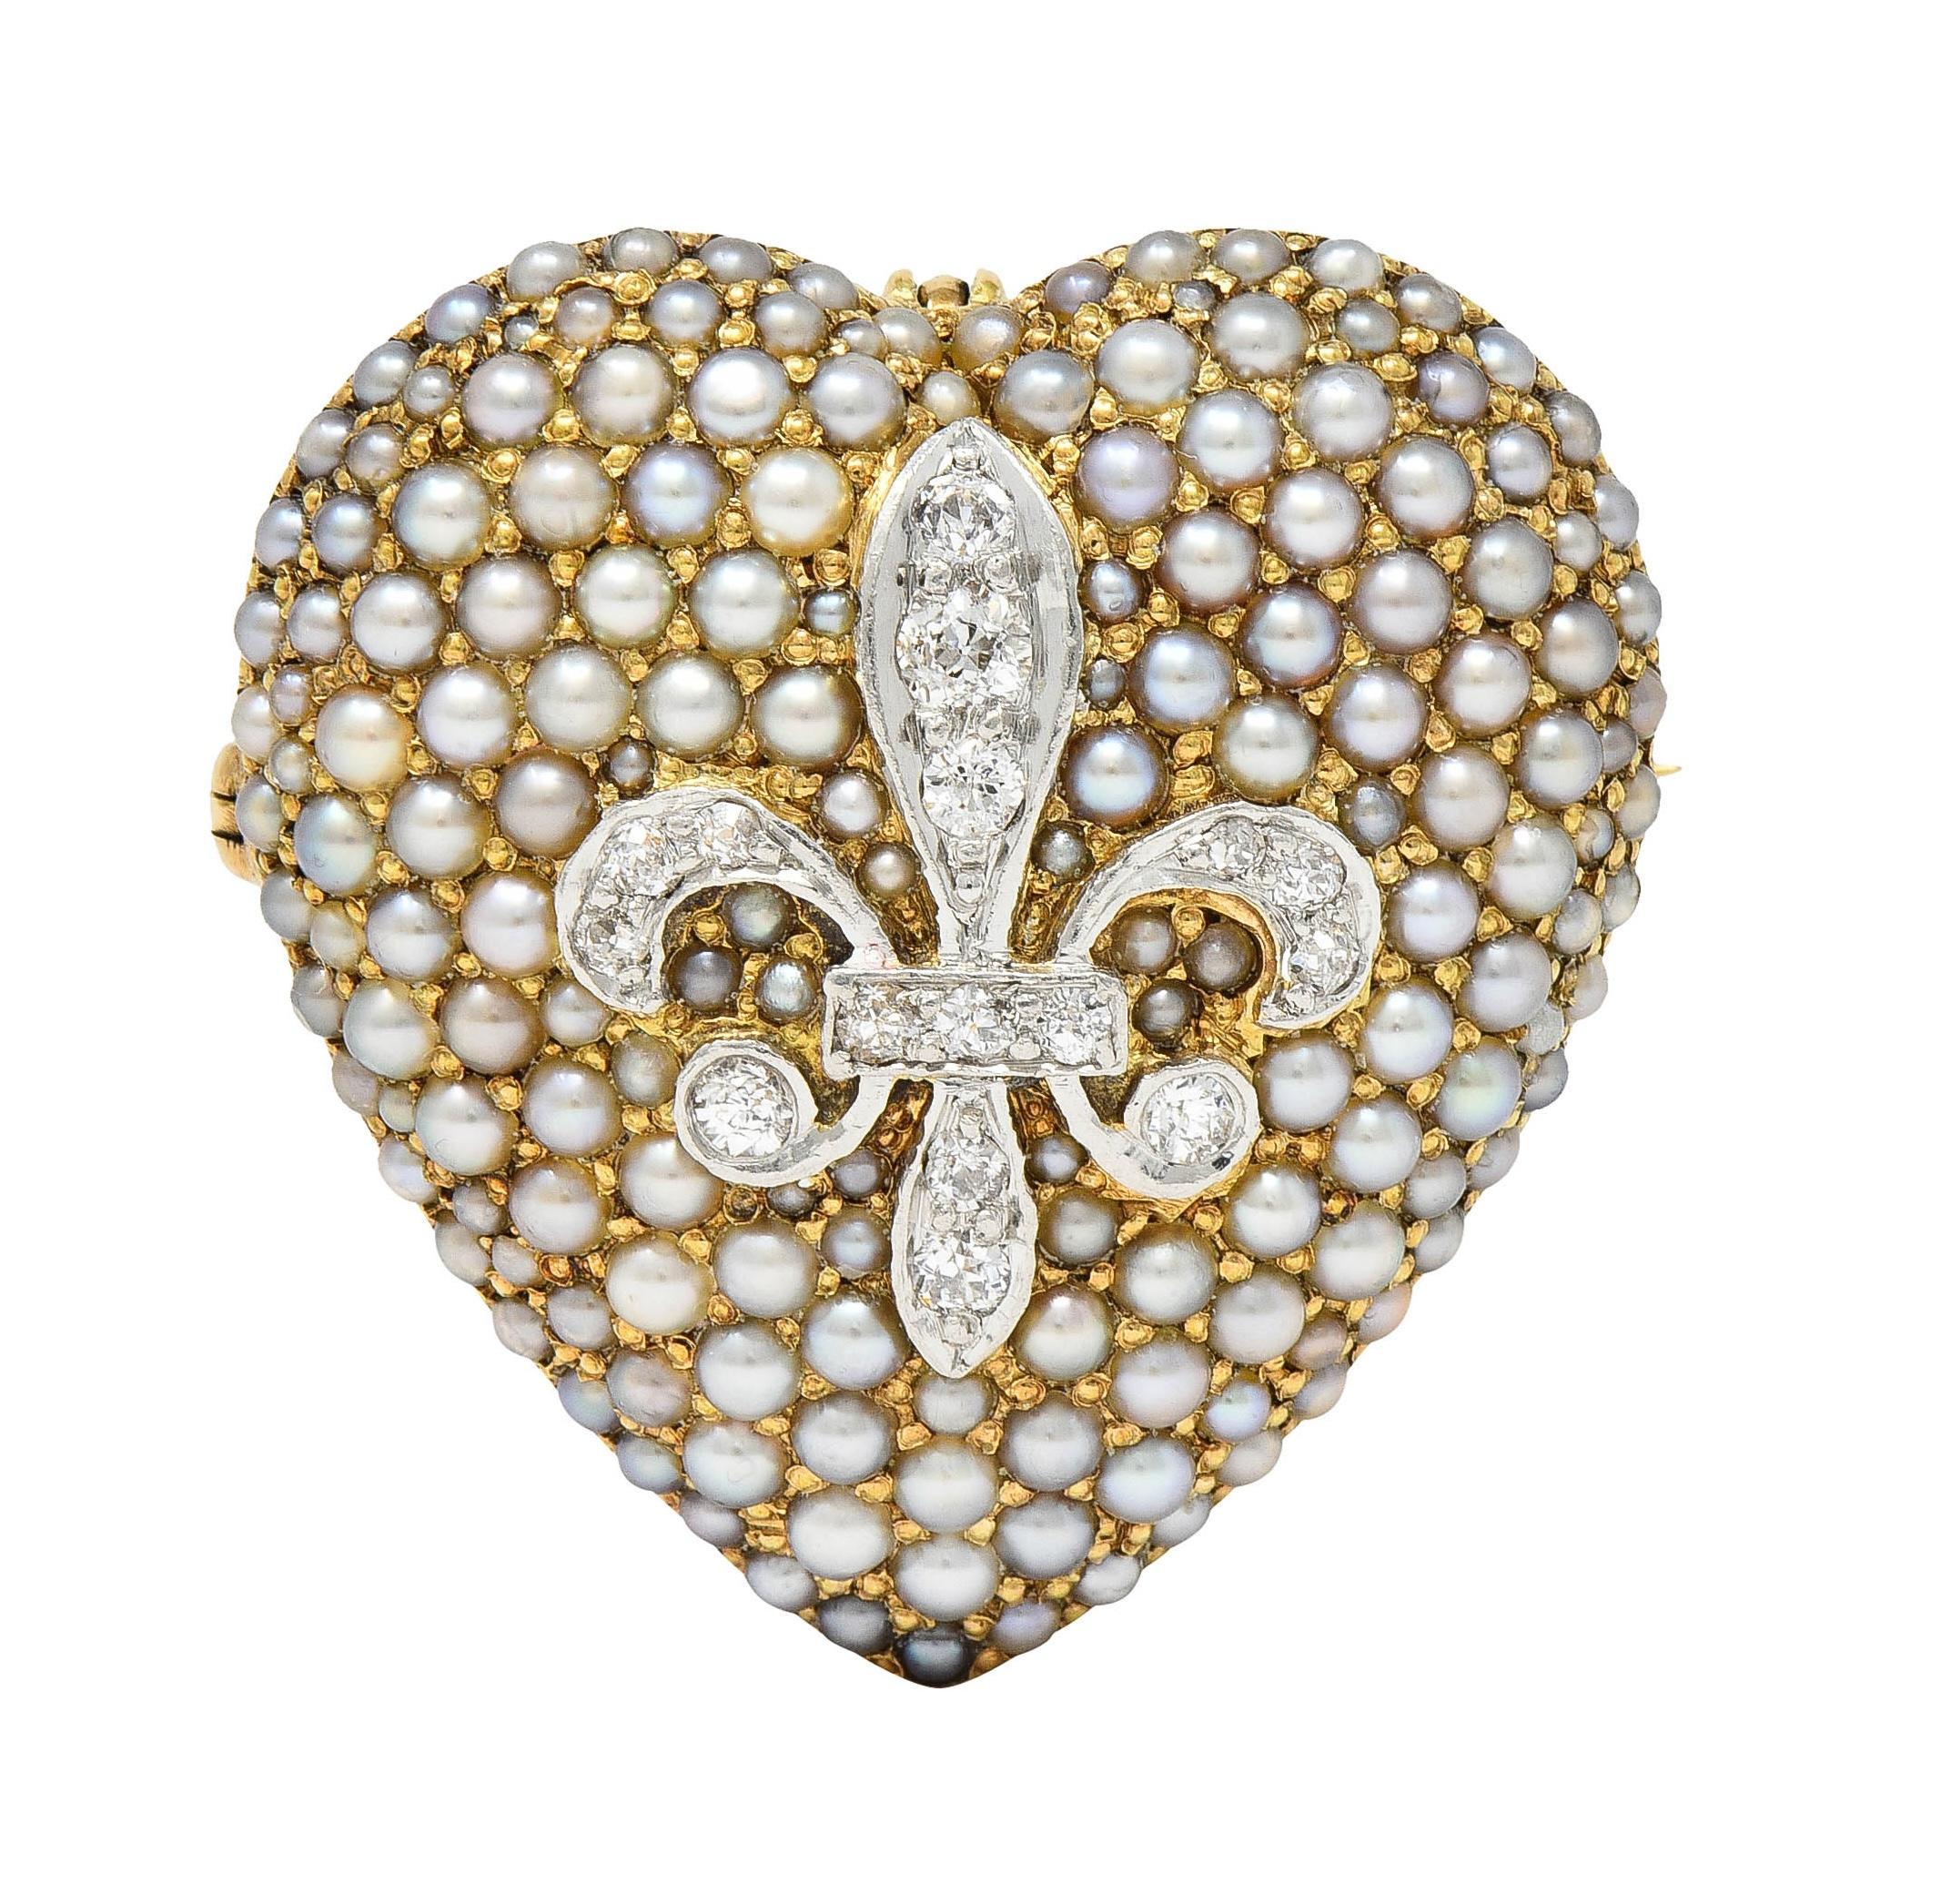 Designed as a domed heart shaped form centering a platinum-topped fleur-de-lis motif
Bead set with old European cut diamonds weighing approximately 0.72 carat total
H to J color with VS2 clarity - heart surround is pavé set with seed pearls 
Ranging